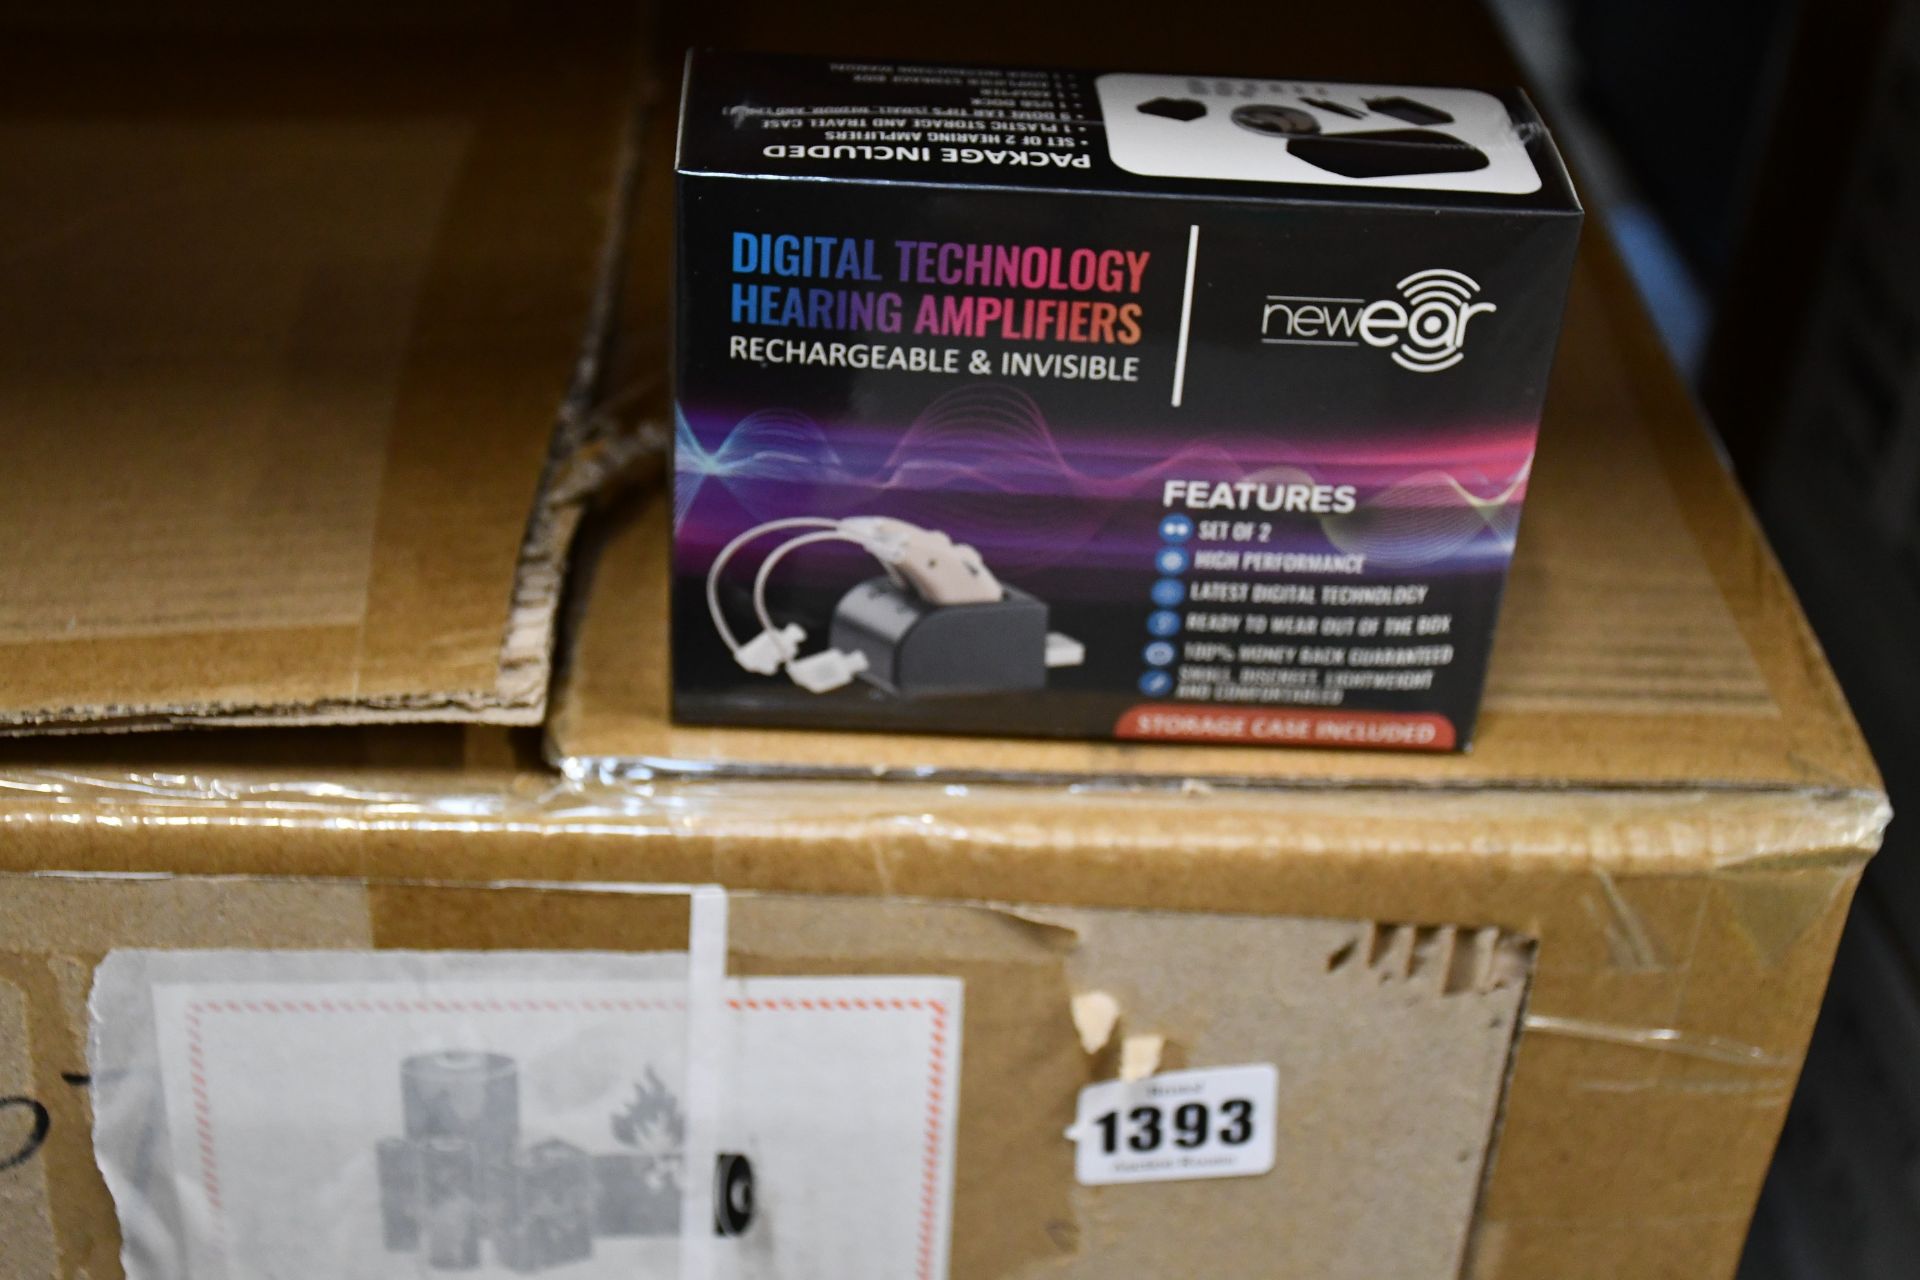 One hundred and twenty boxed as new Newear digital technology hearing amplifiers (NE 339).